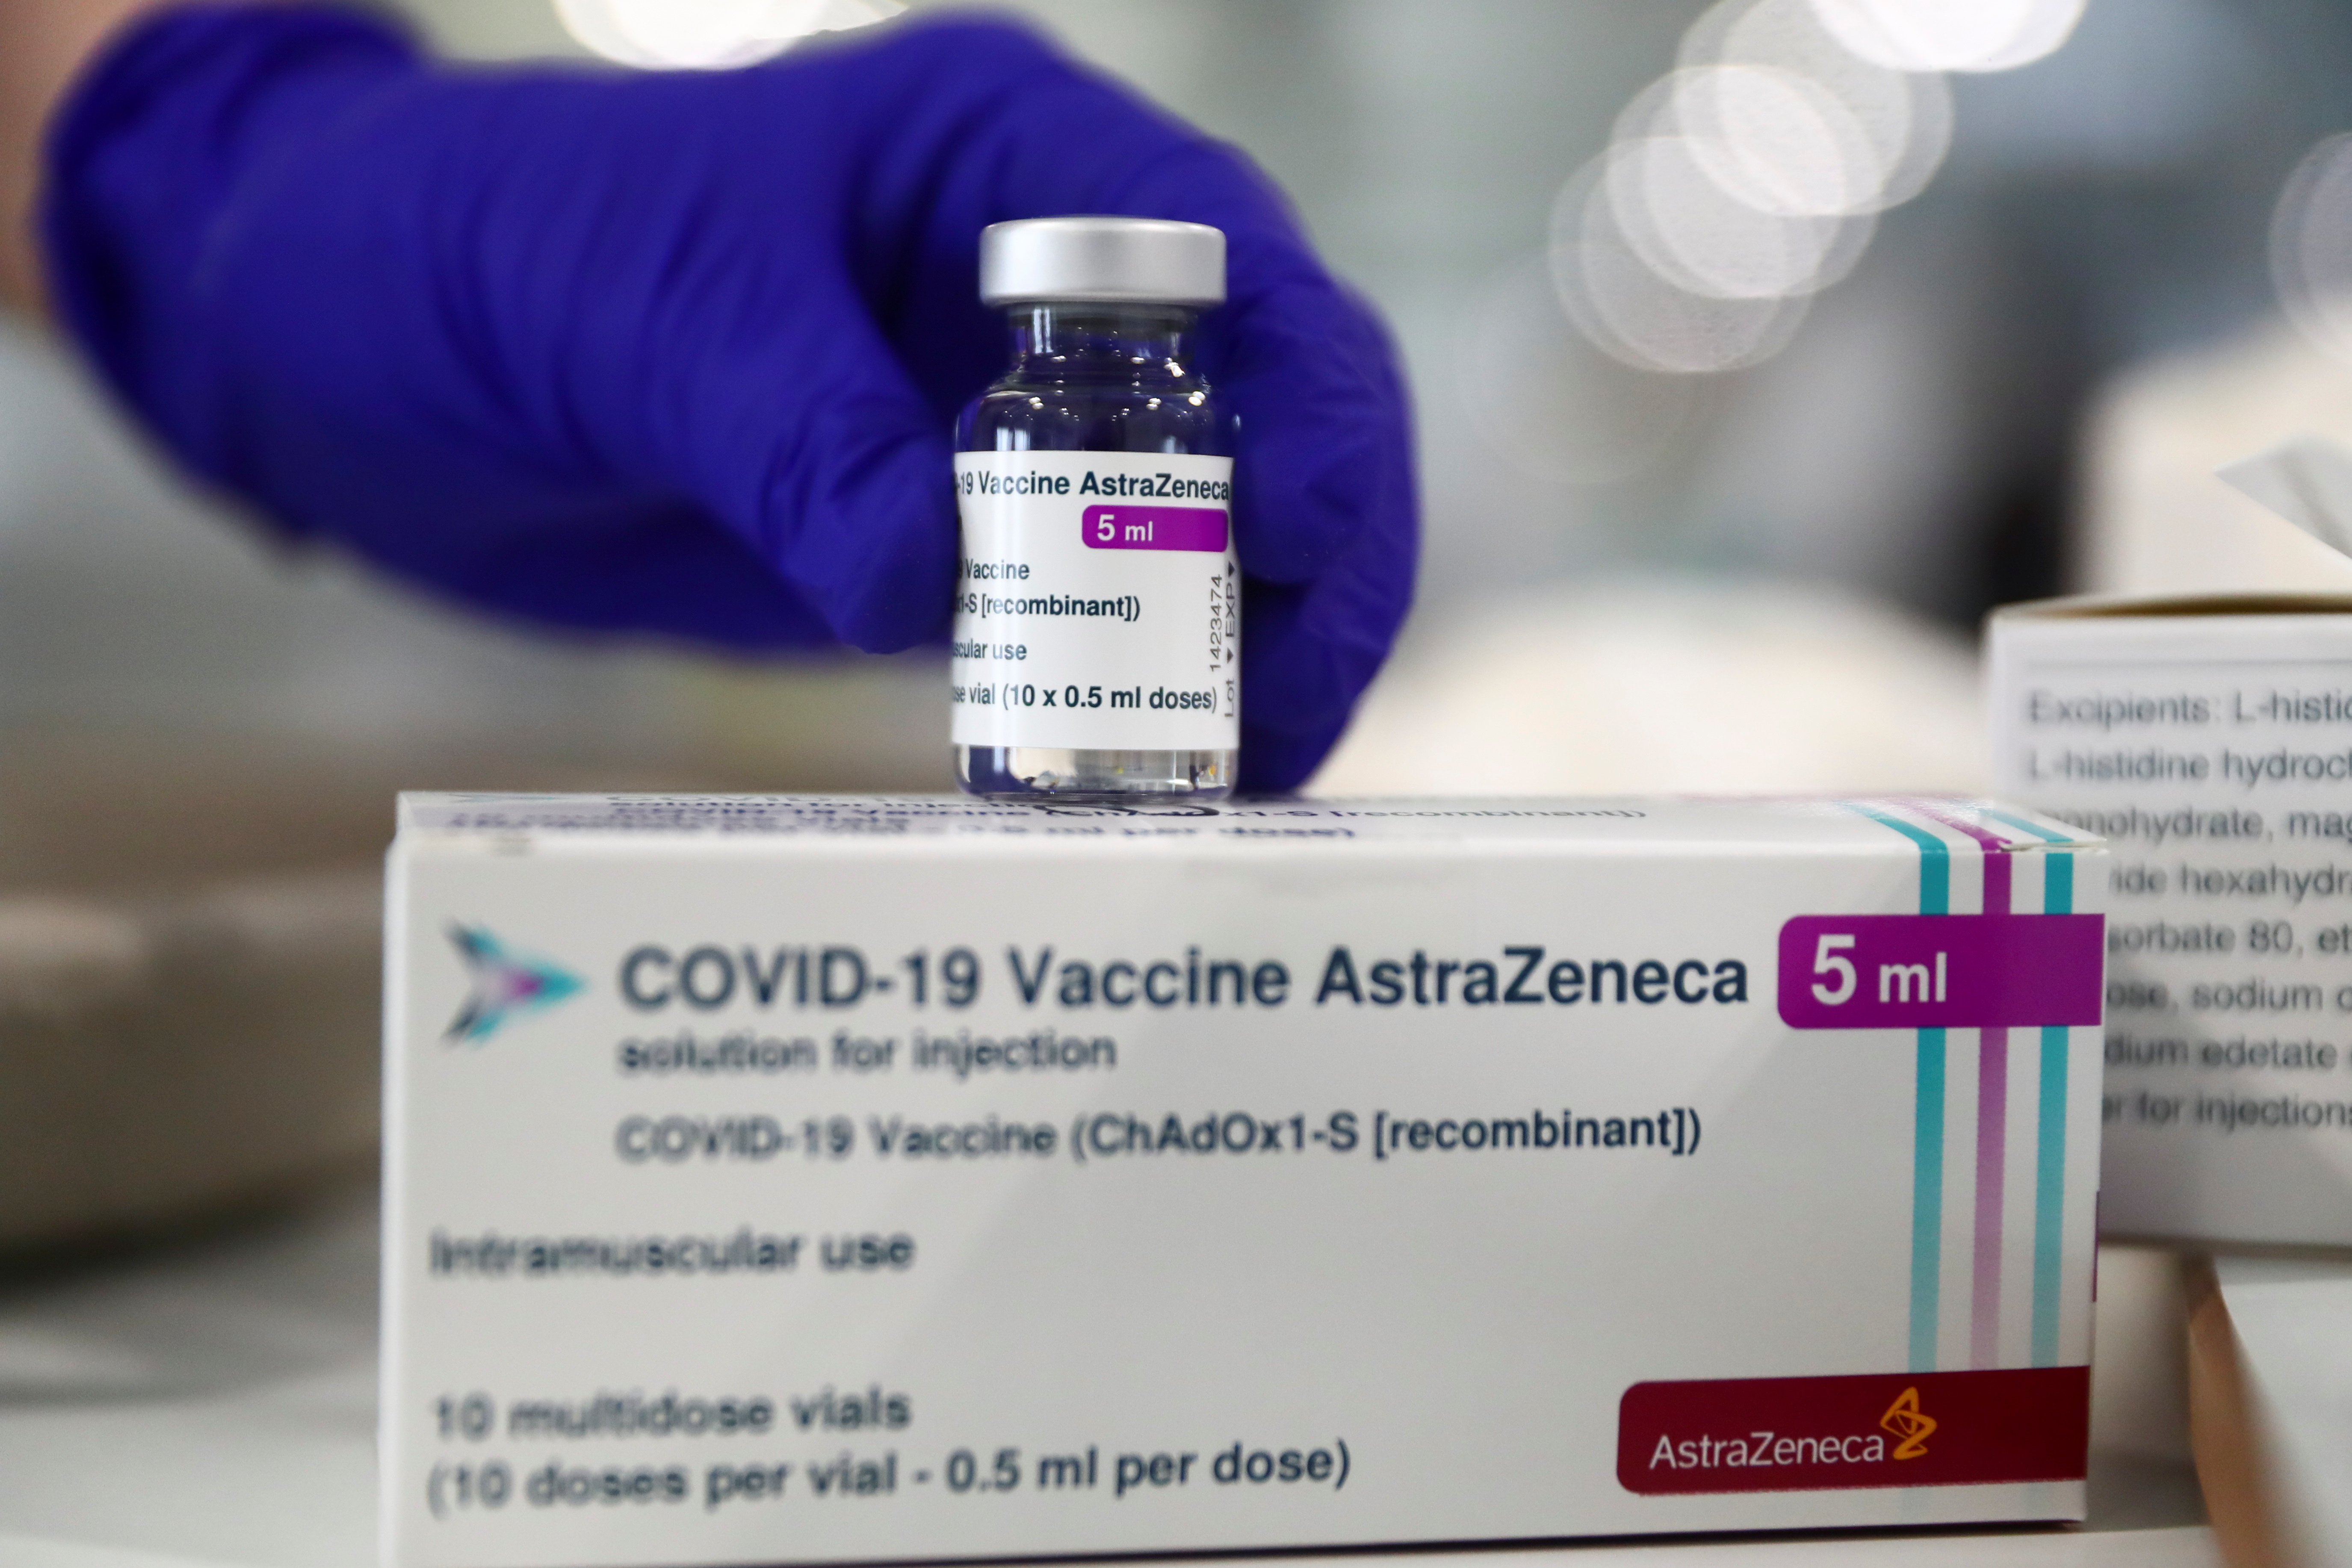 COVID-19 vaccinations in Madrid